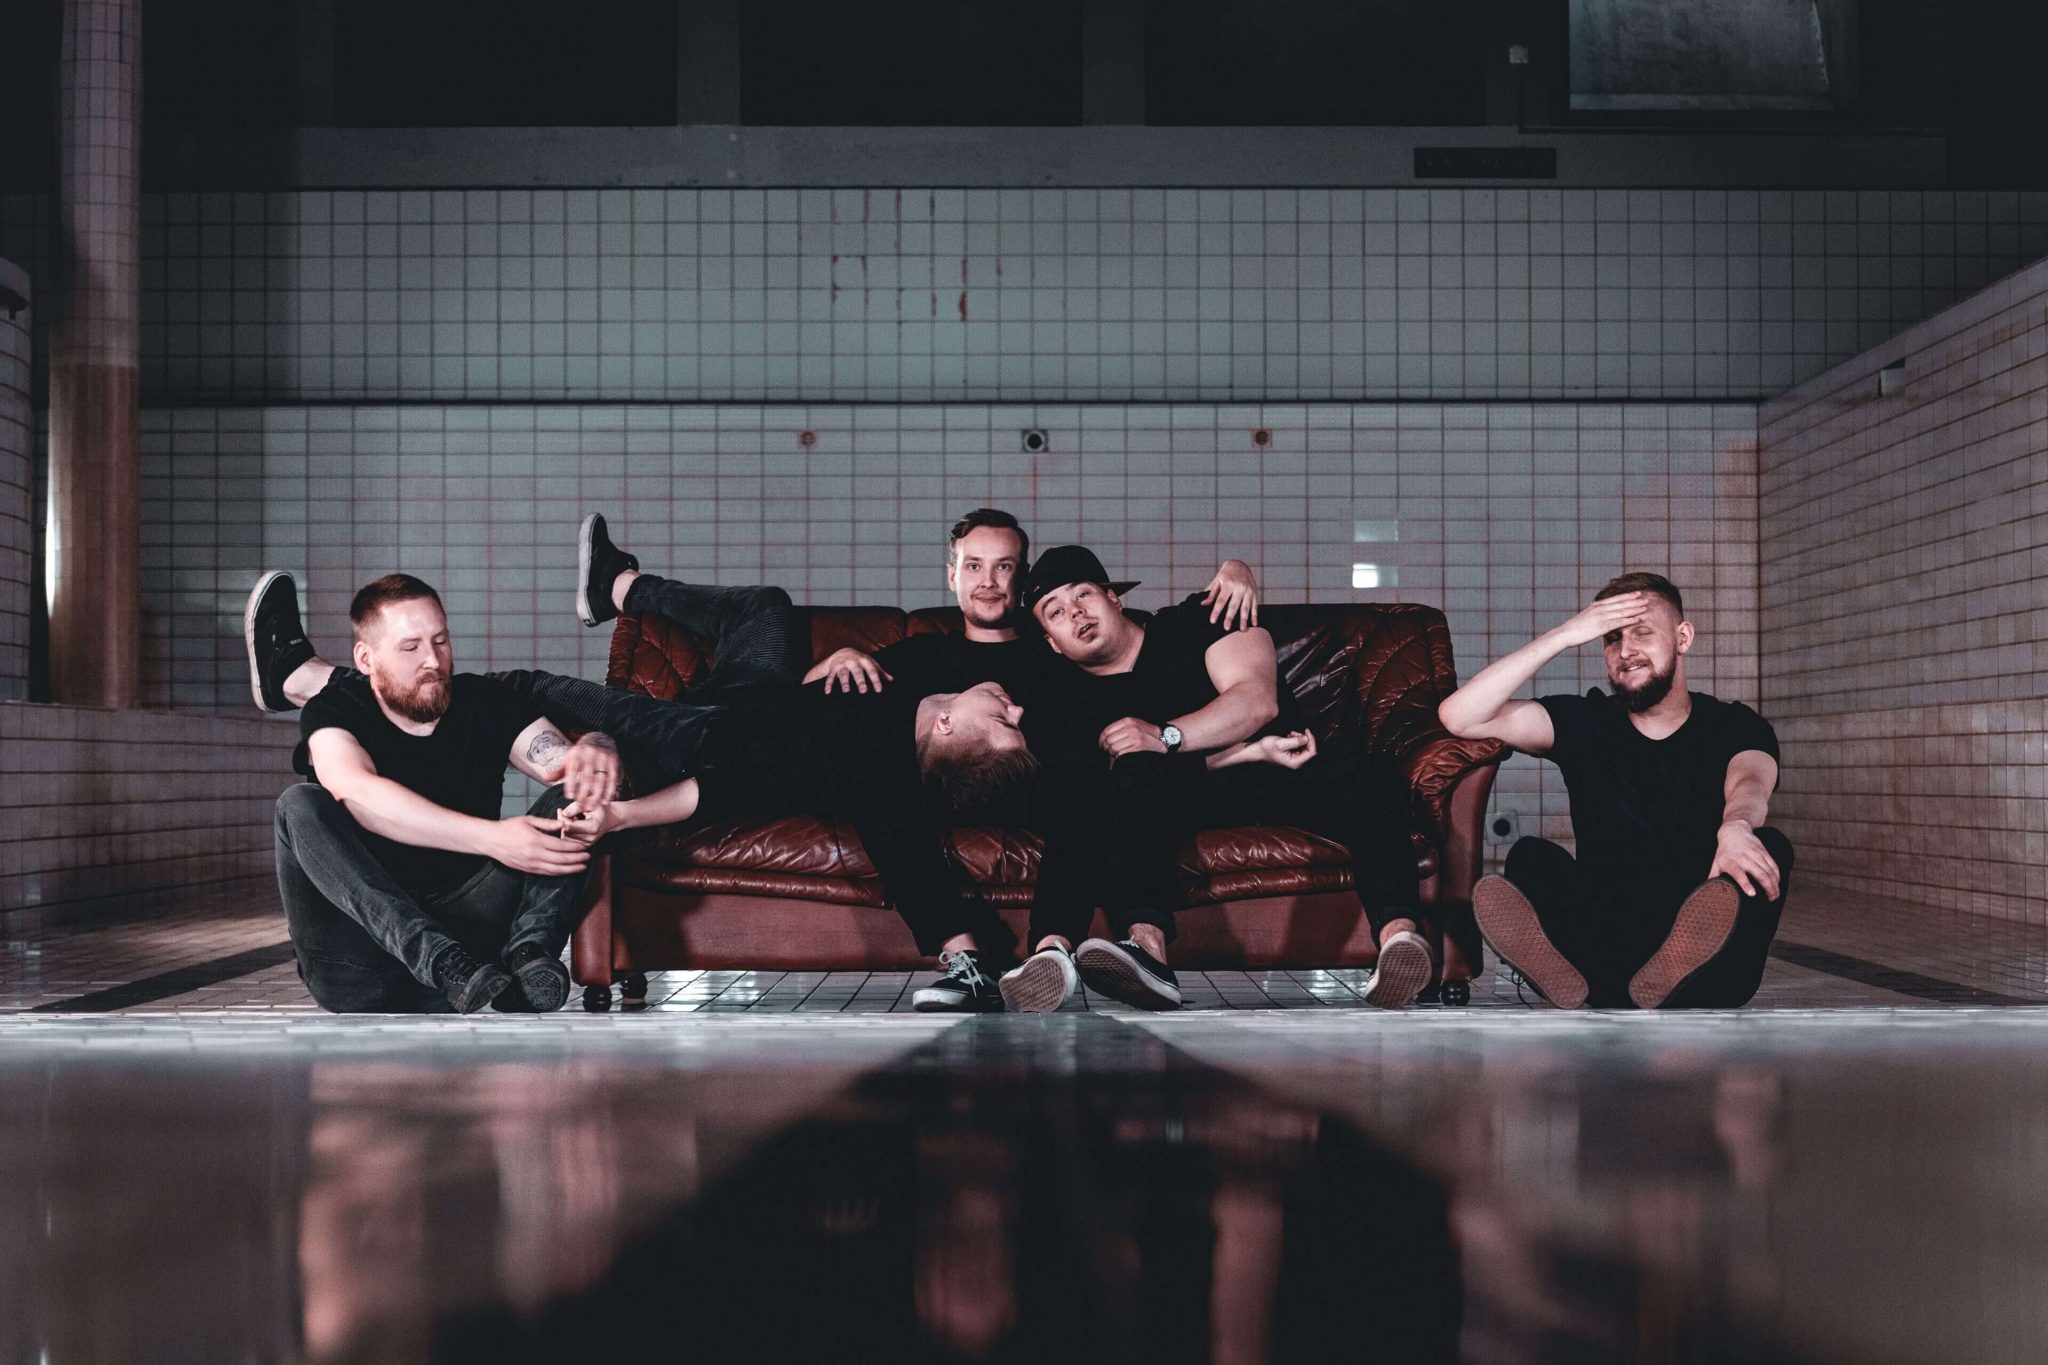 Finnish metal band Koitos released a single "Tämä Maa" (eng. “This earth”), which is the second release from the upcoming debut album. First single “Ilman kurssia” was released in October.